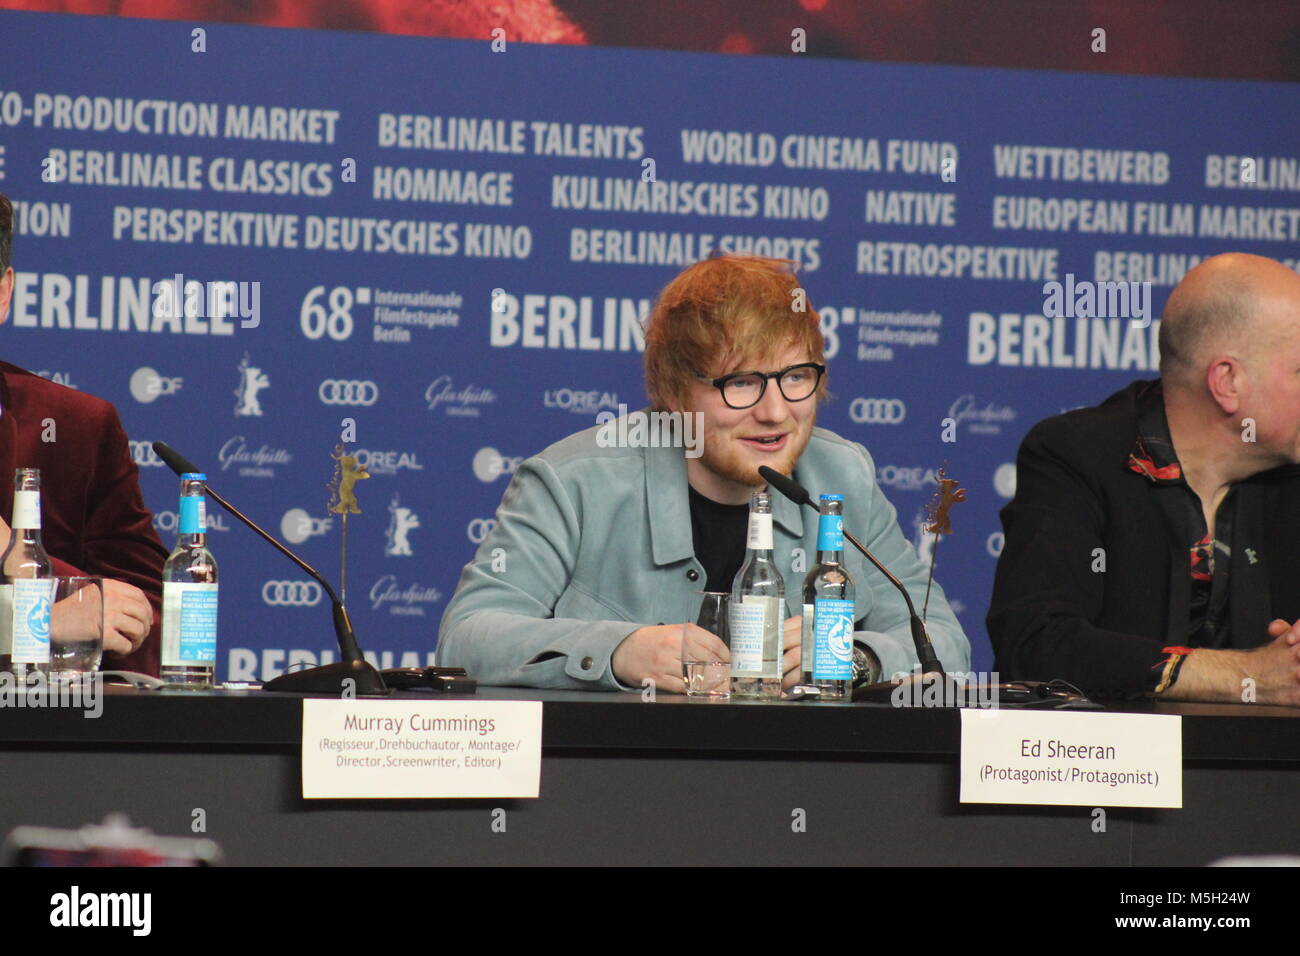 Berlin, Germany. 23rd February, 2018. Press conference at the Grand Hyatt Hotel in Berlin/Germany for “ Songwriter“ by 68th Berlinale, with Murray Cummings (Director, Screenwriter, Editor, Producer),  Ed Sheeran, Foy Vance , Alejandro Reyes-Knight, Billy Cummings , “Credits: T.O.Pictures / Alamy Live News“ Stock Photo